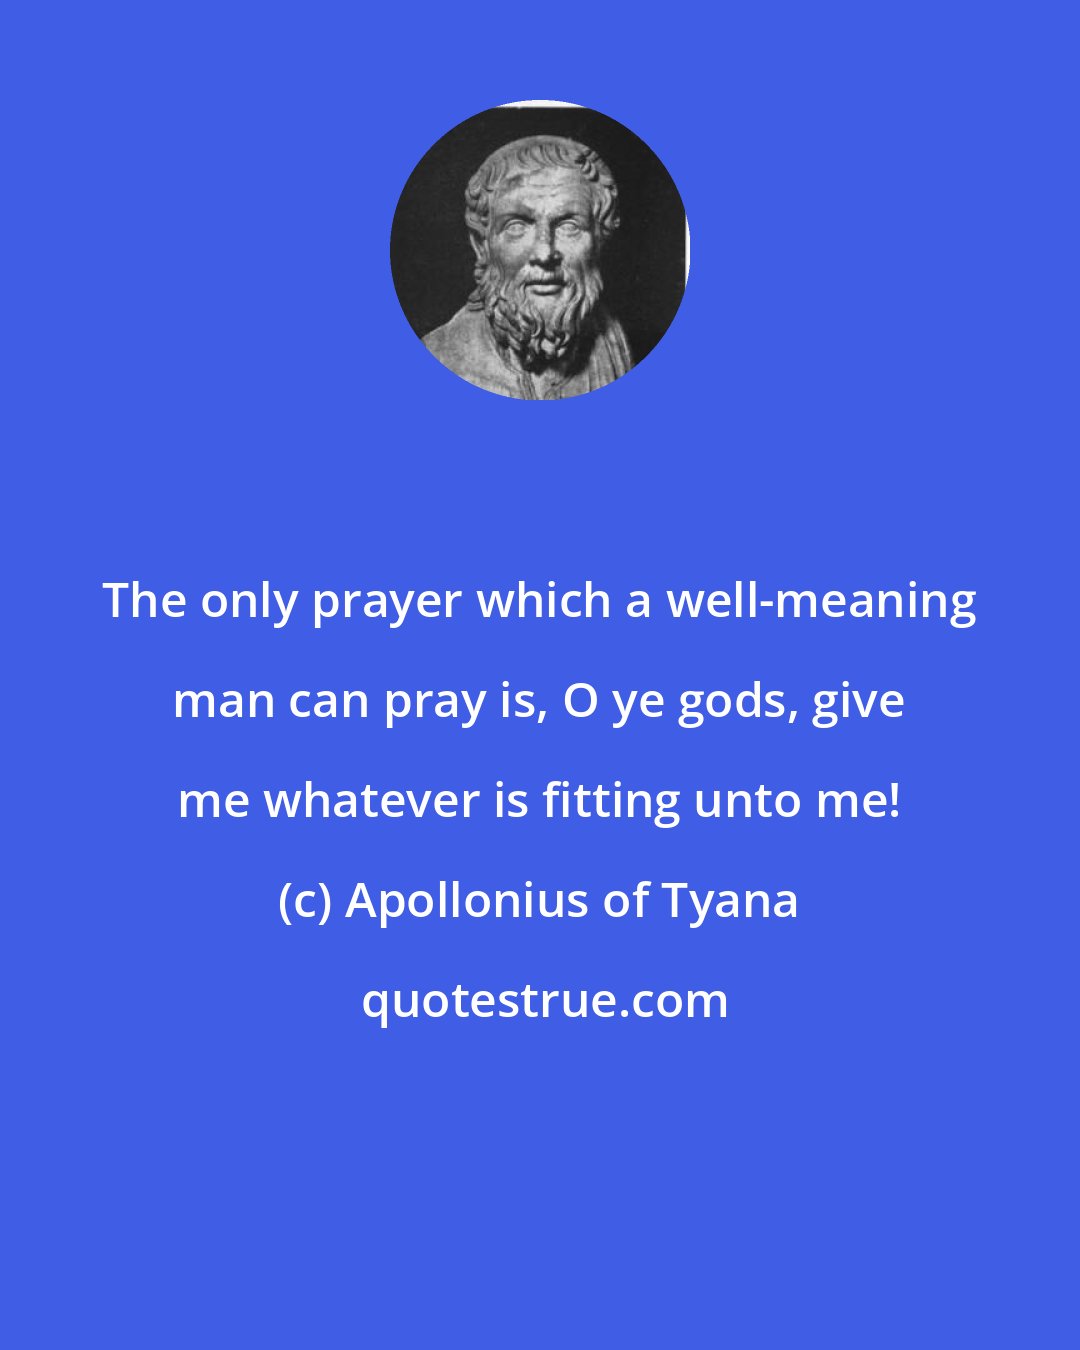 Apollonius of Tyana: The only prayer which a well-meaning man can pray is, O ye gods, give me whatever is fitting unto me!